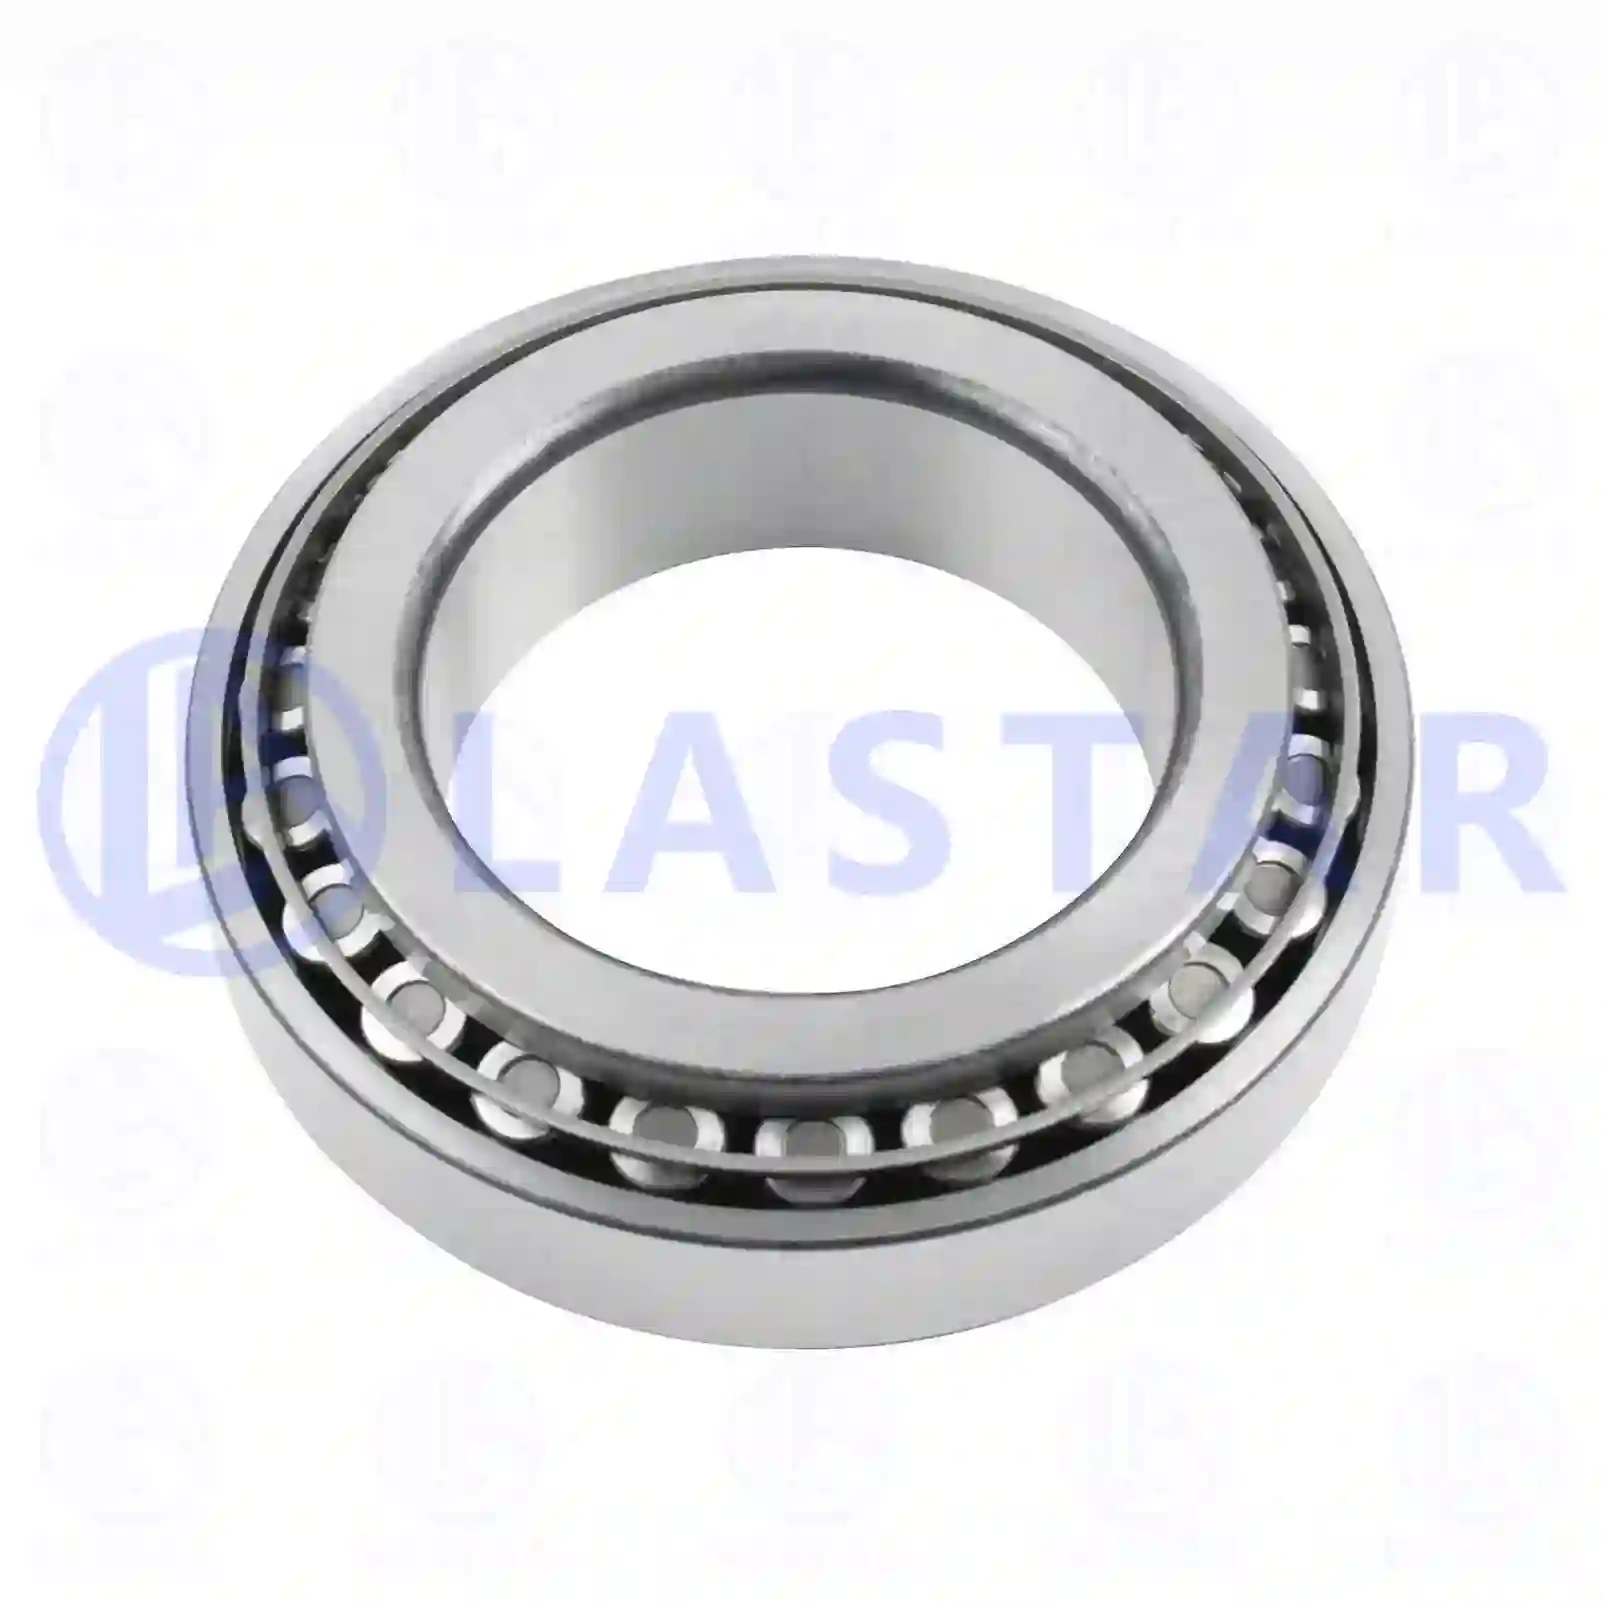 Tapered roller bearing, 77731254, 260724, 181279S, 181596S, 184637 ||  77731254 Lastar Spare Part | Truck Spare Parts, Auotomotive Spare Parts Tapered roller bearing, 77731254, 260724, 181279S, 181596S, 184637 ||  77731254 Lastar Spare Part | Truck Spare Parts, Auotomotive Spare Parts